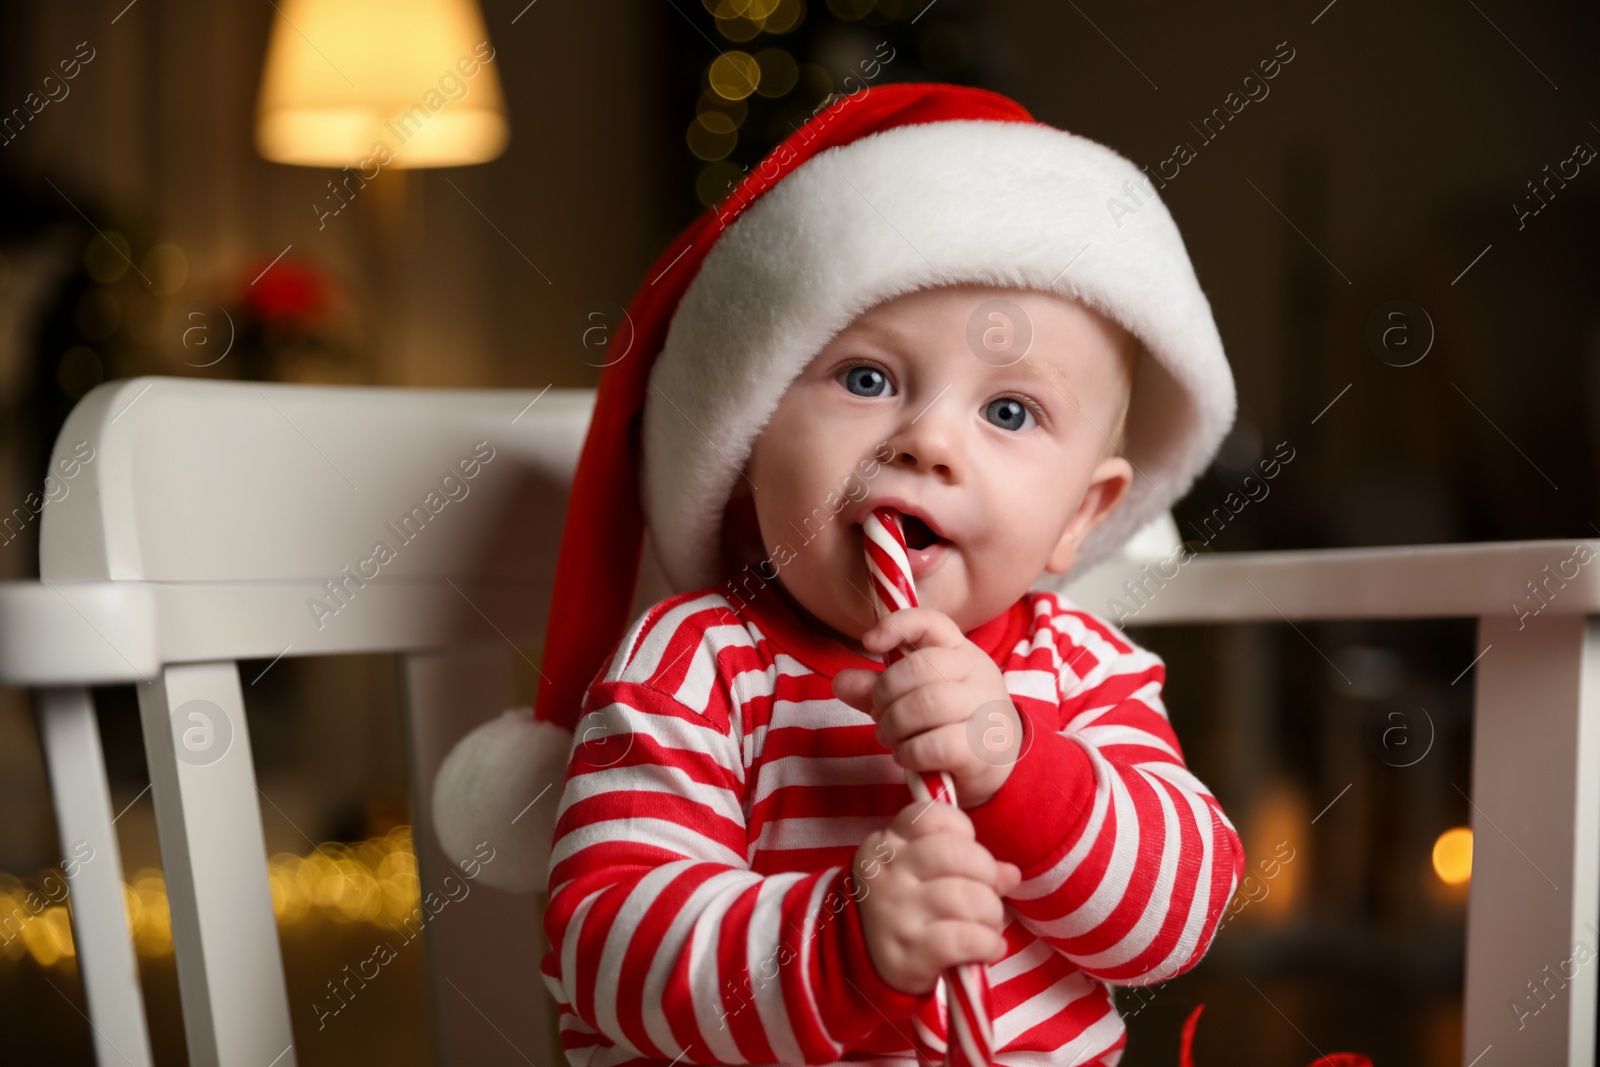 Photo of Cute baby in Santa hat and bright Christmas pajamas eating candy cane at home